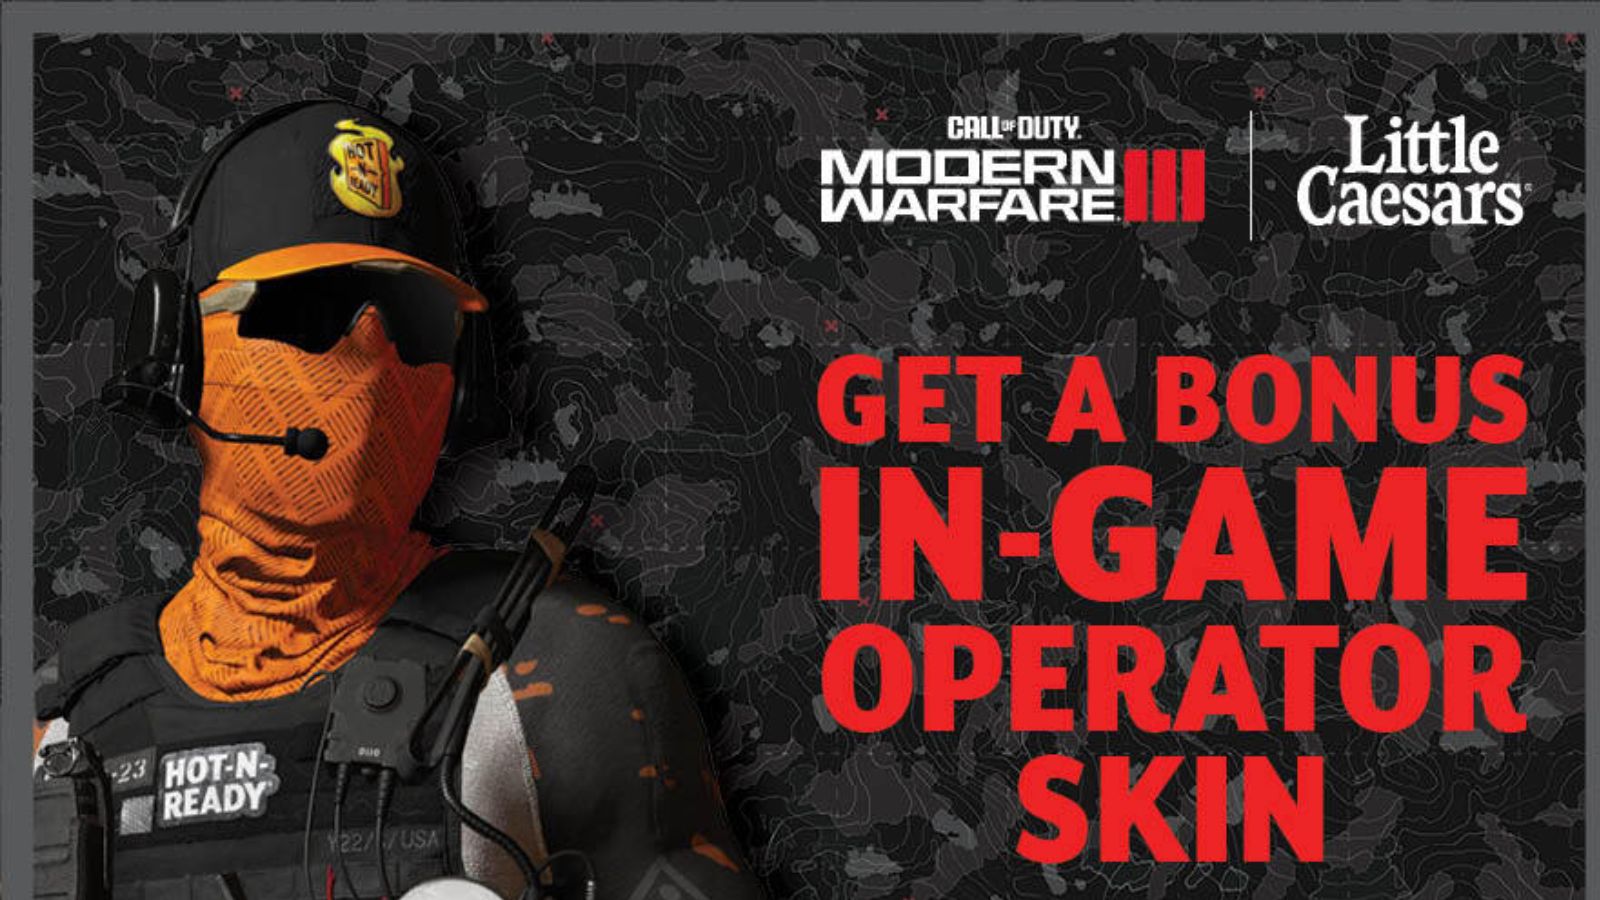 Little Caesars MW3 partnershipgives exclusive skin and more ONE Esports